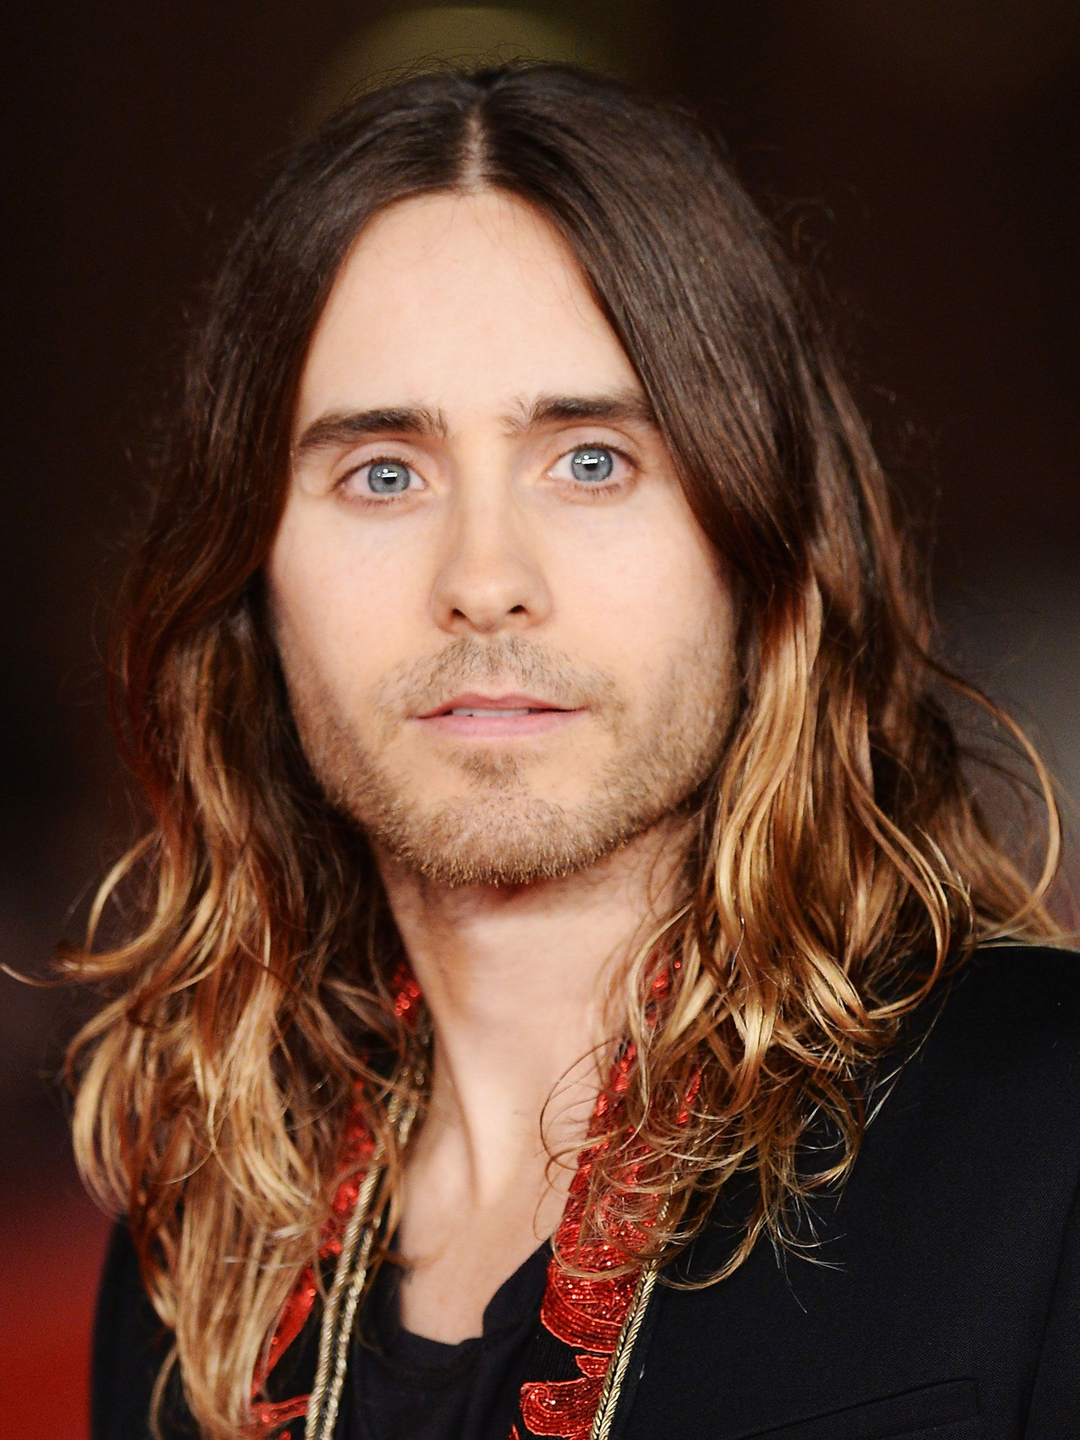 Jared Leto who is his father